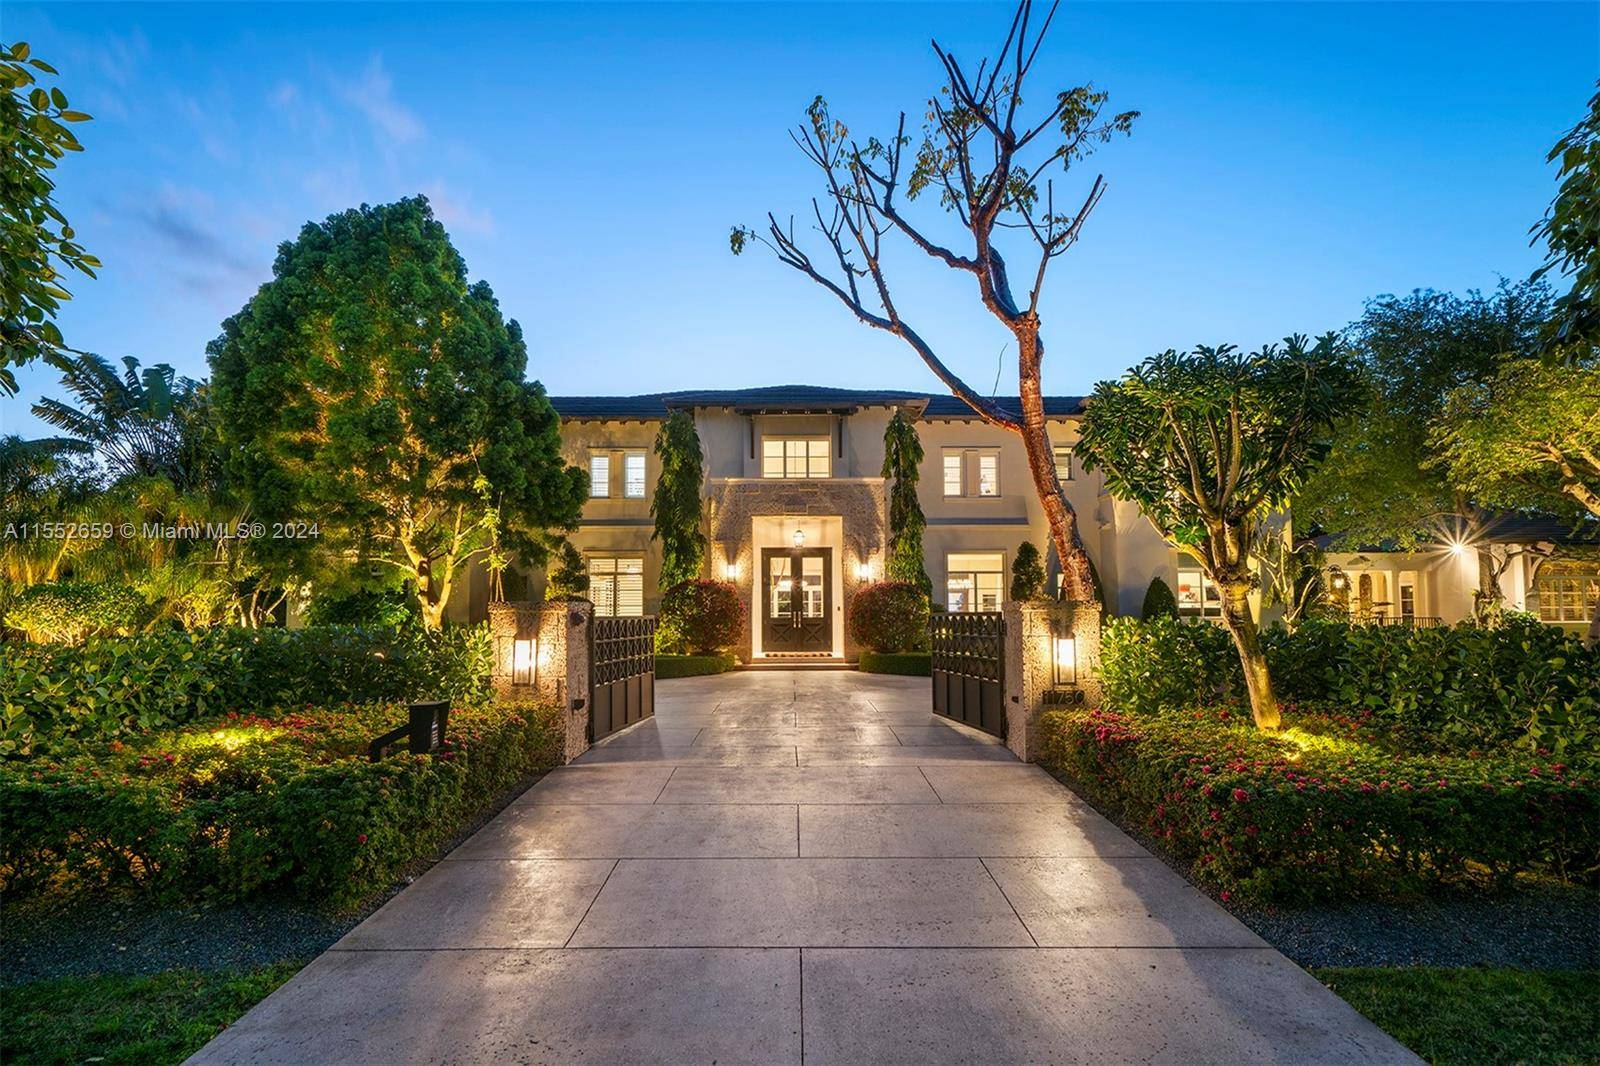 Welcome to this two story haven designed by Ramon Pacheco, where spacious layout invite exploration.